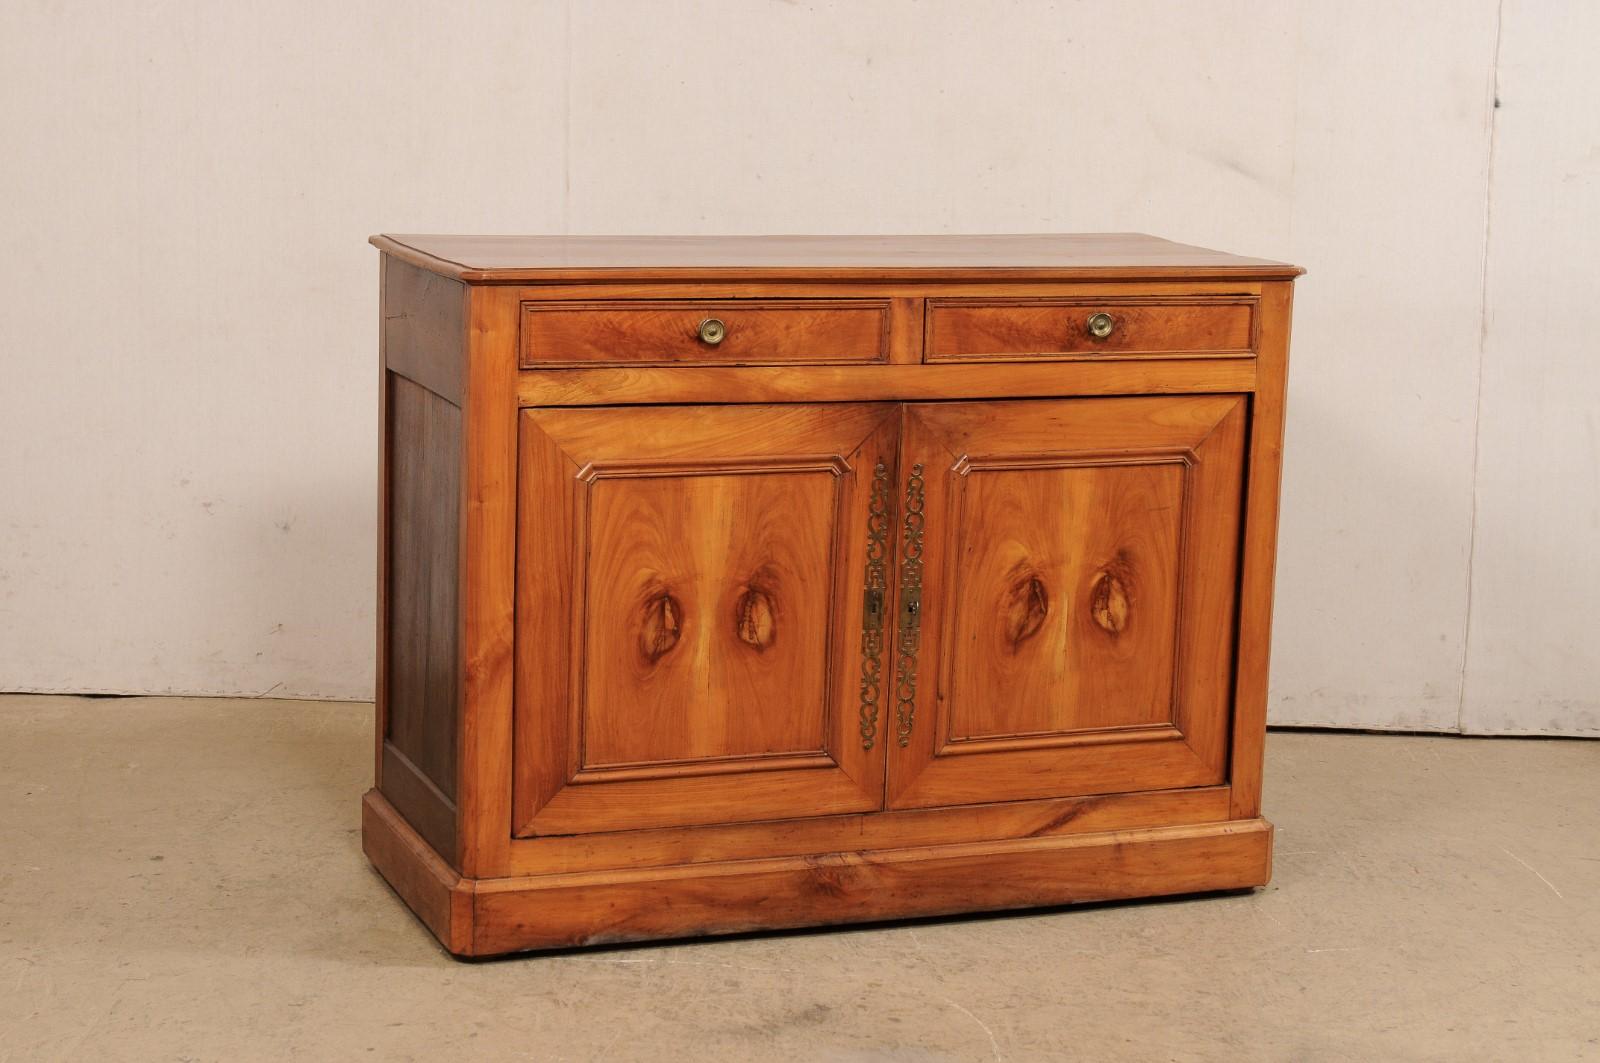 A French wooden buffet cabinet from the 19th century. This antique cabinet from France has a beautiful fruitwood grain shown throughout, which speaks to the simplistic and clean lines of the piece. The case houses a pair of half-sized drawers at